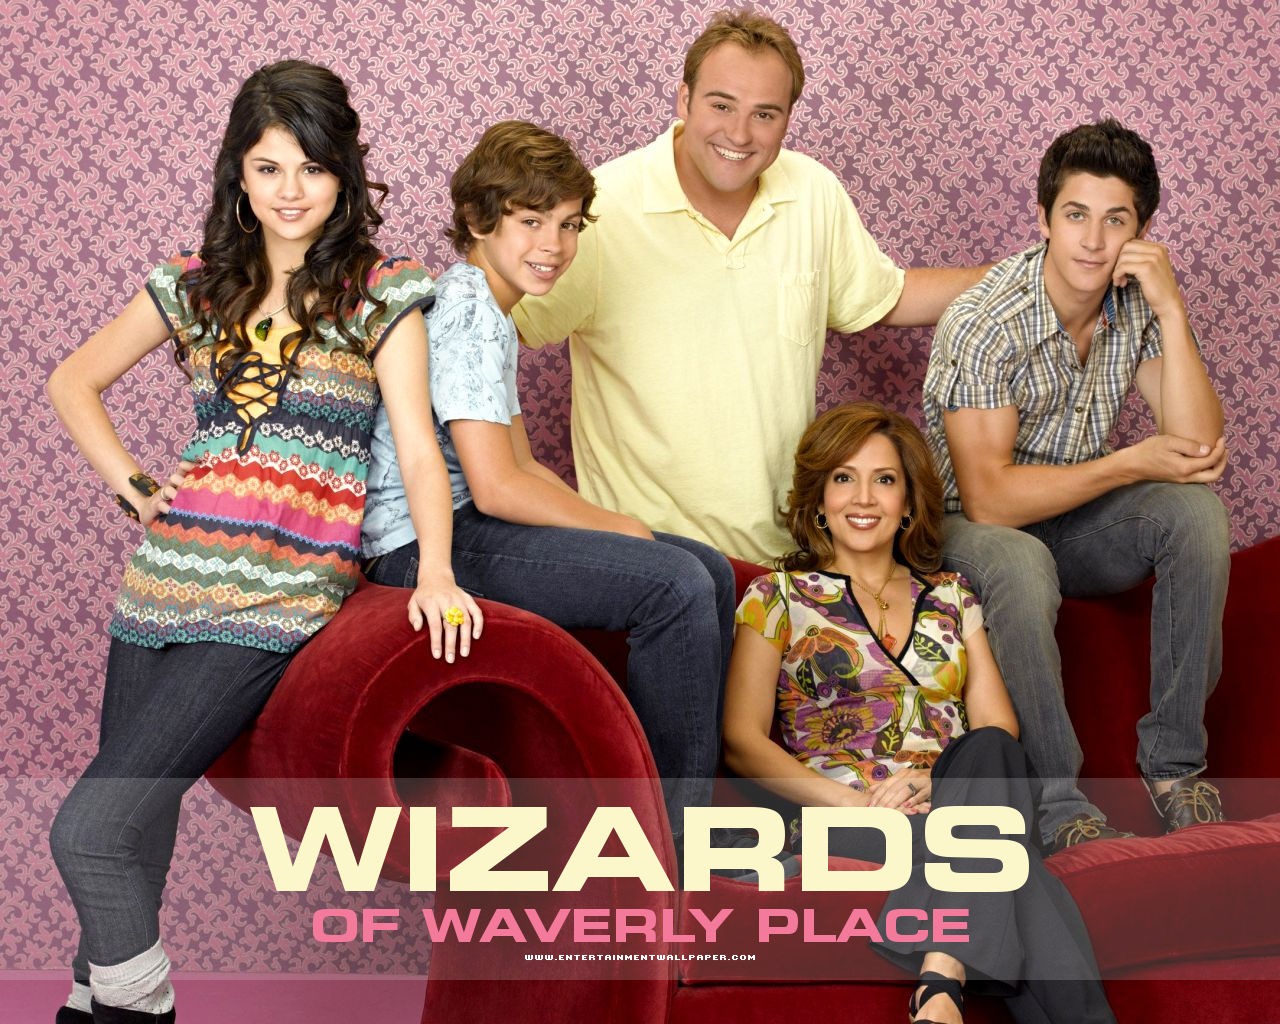 Wizards of Waverly Place 少年魔法師 #1 - 1280x1024